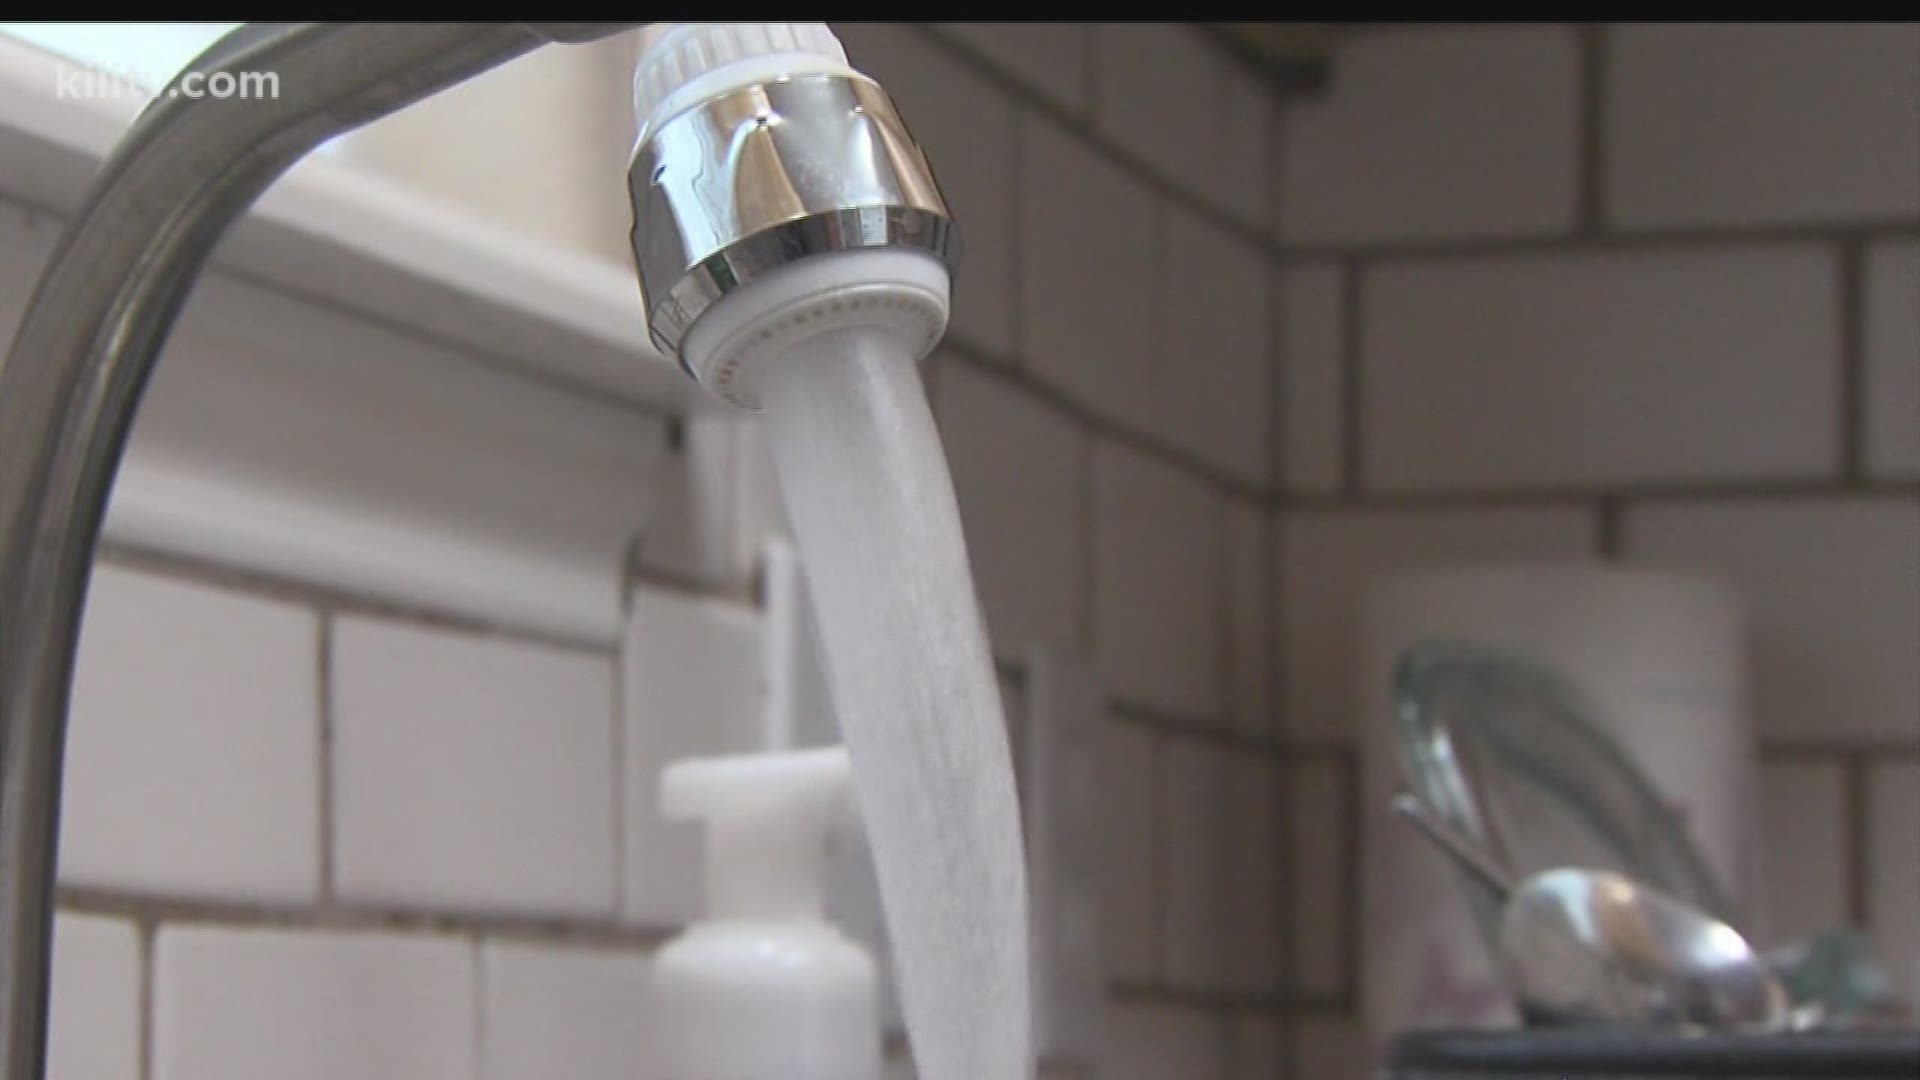 The water boil was first issued last Friday after a power outage sent the City's water storage tanks offline, causing water pressure to drop below-mandated state levels.